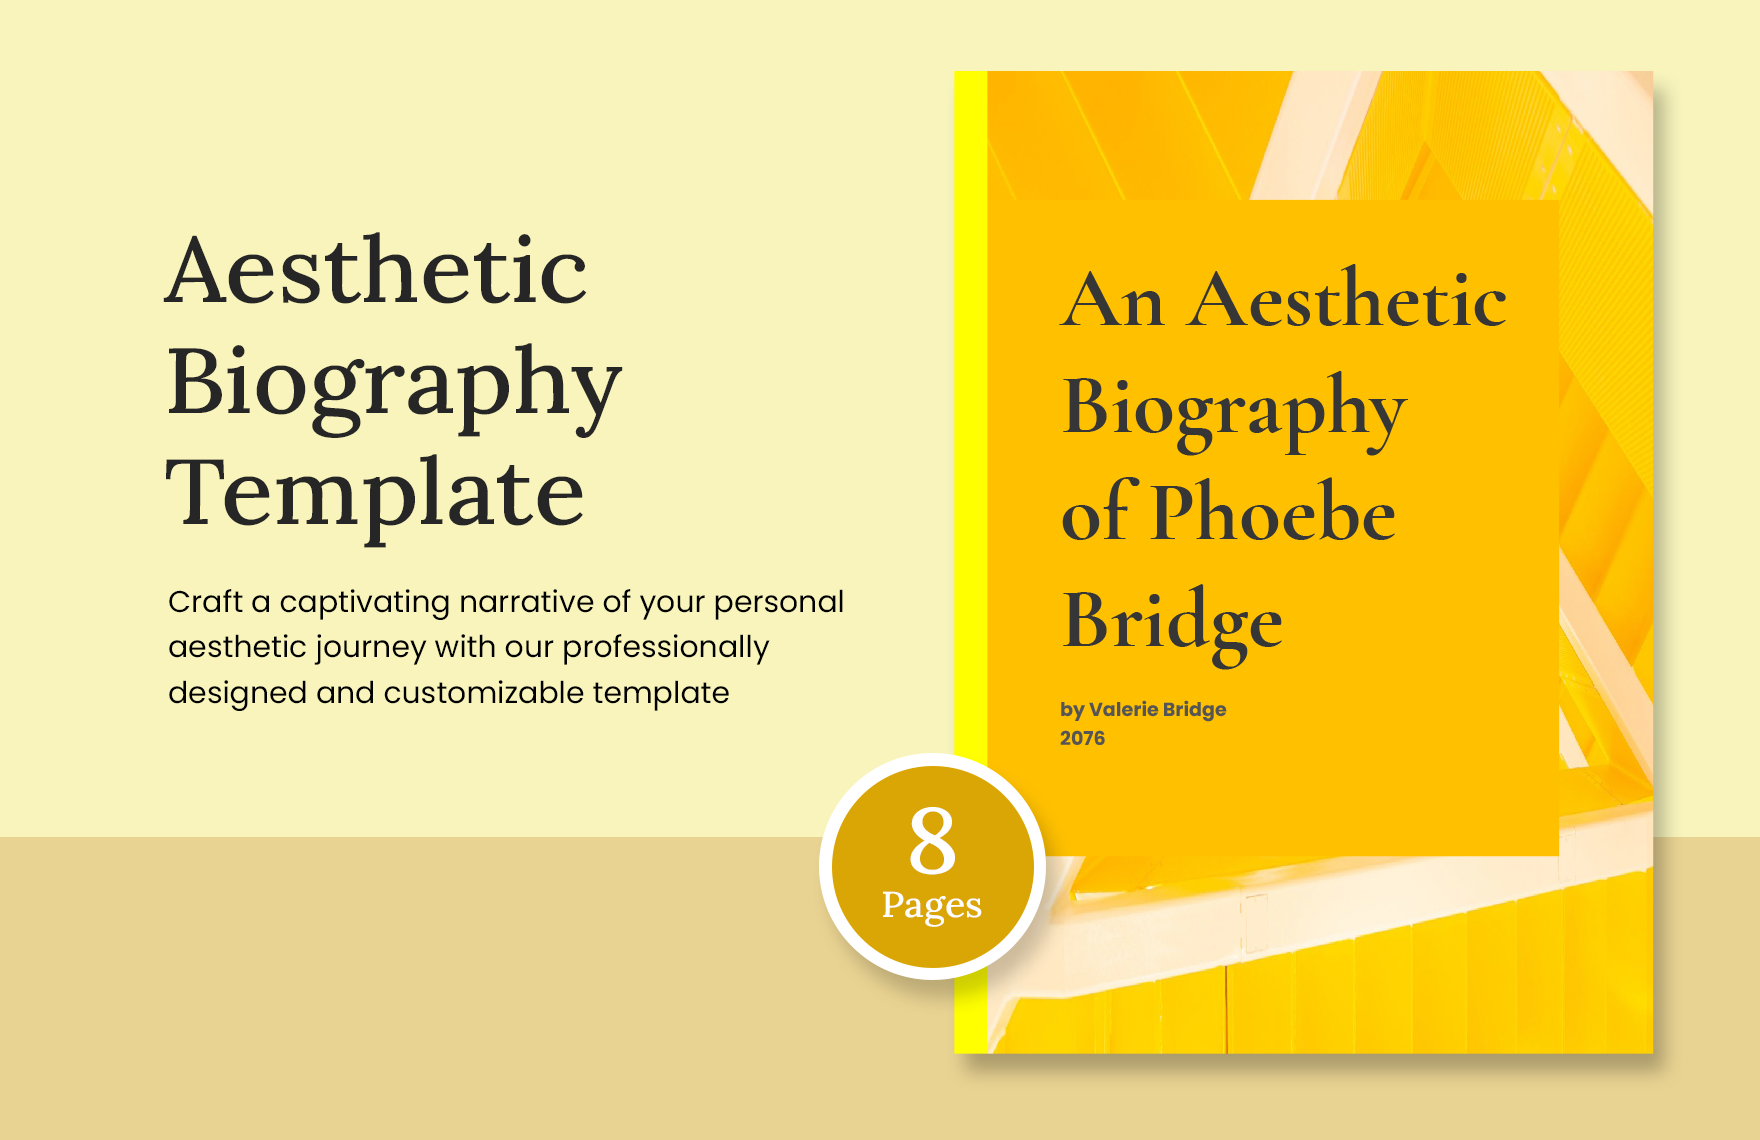 Aesthetic Biography Template